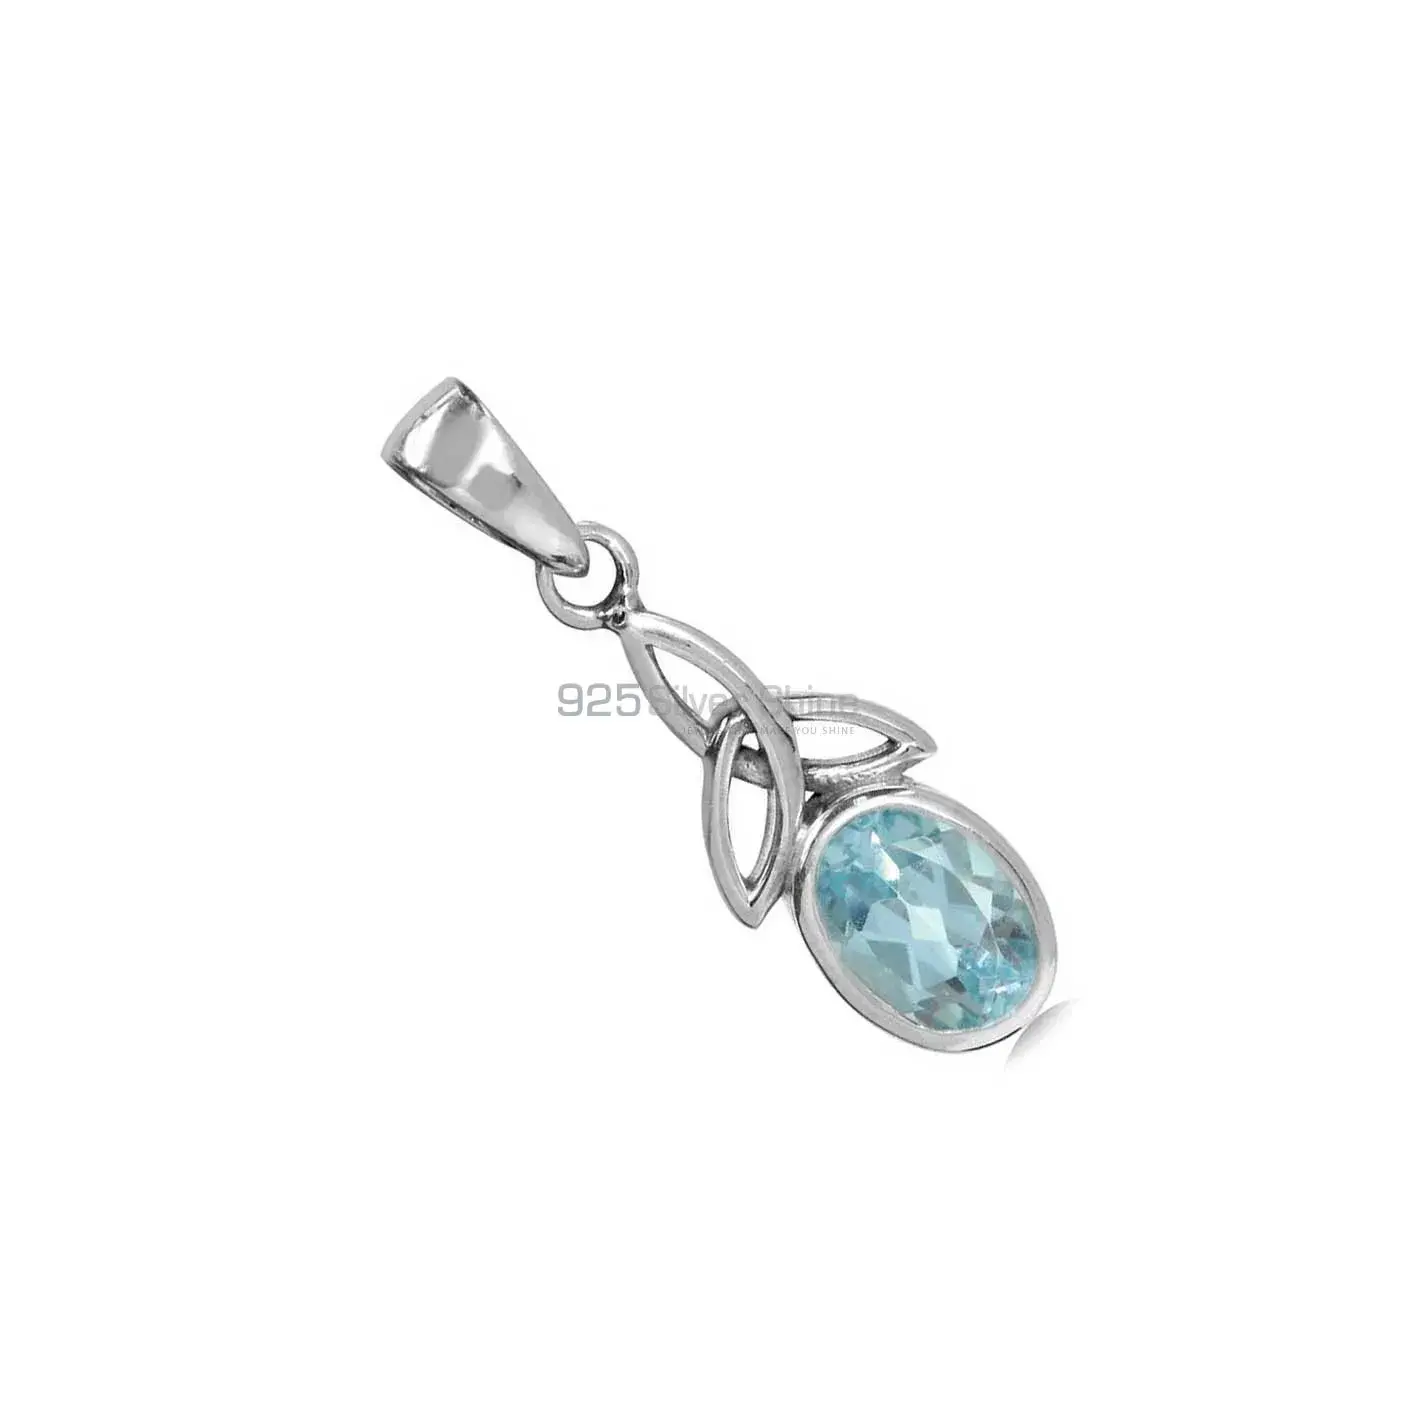 High Quality 925 Fine Silver Pendants Suppliers In Blue Topaz Gemstone Jewelry 925SP06-4_1